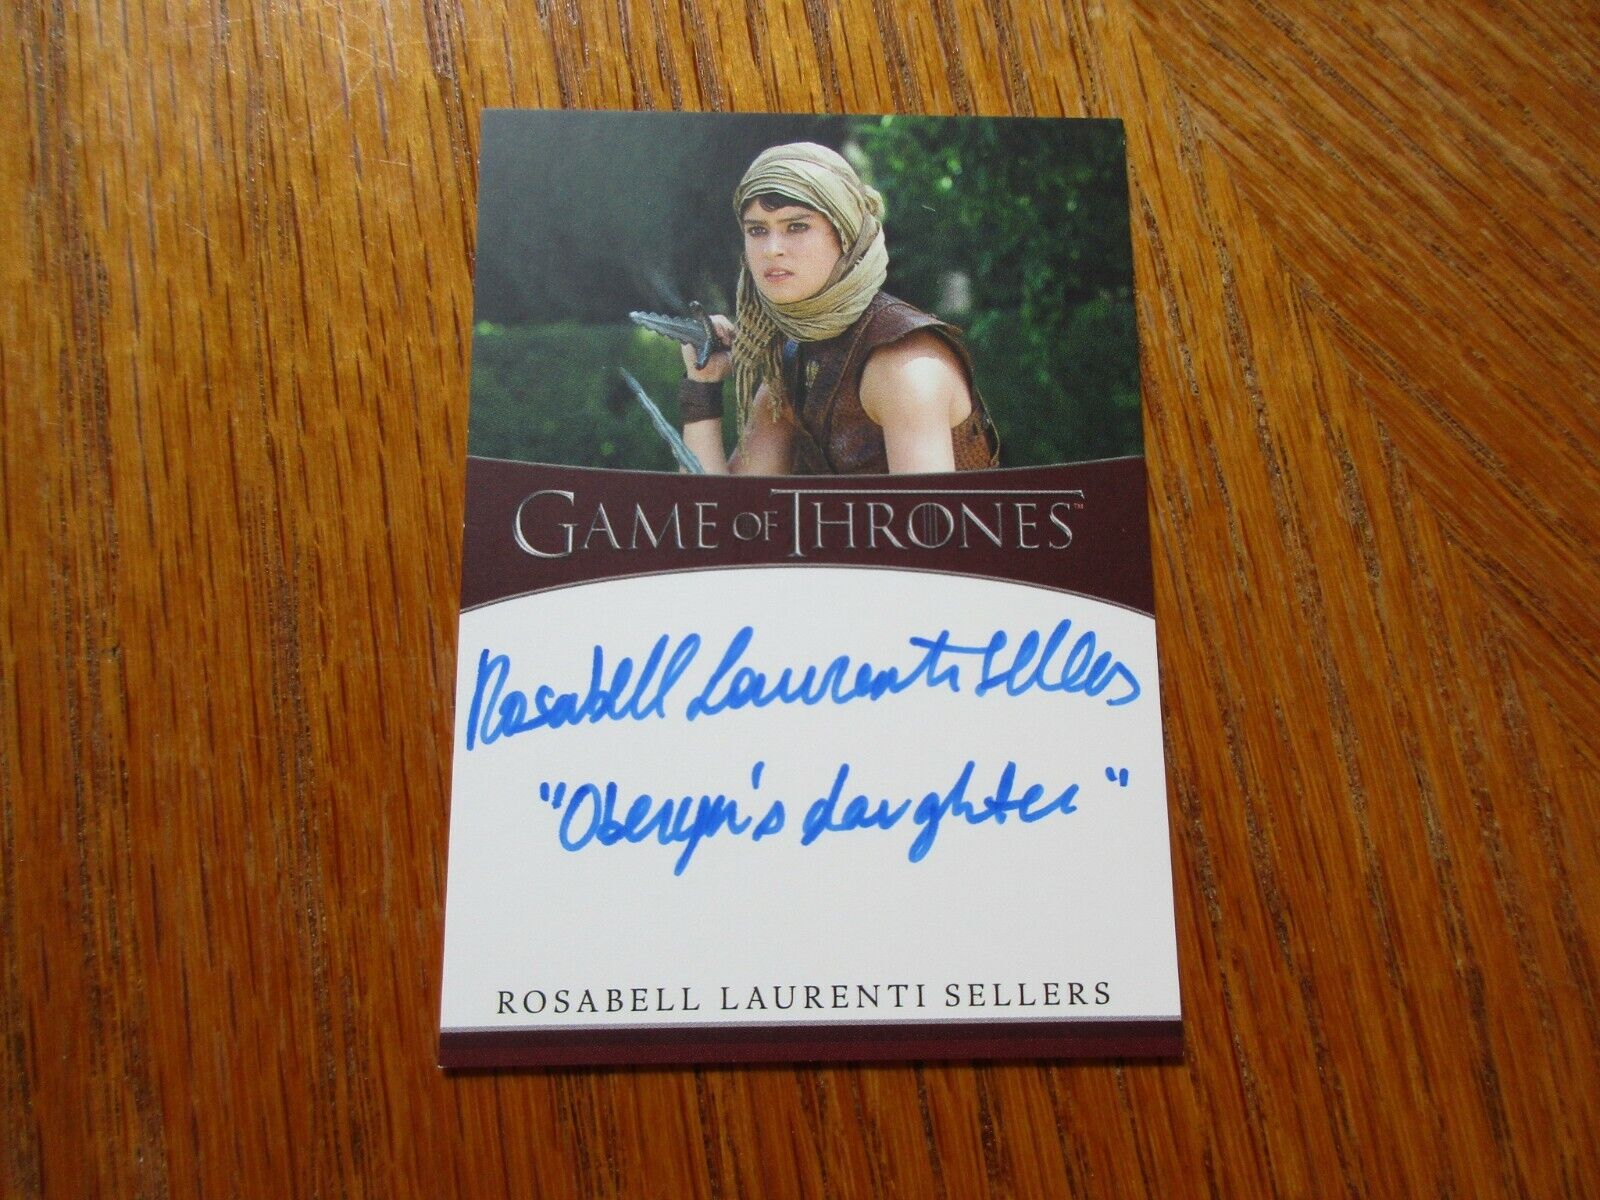 Game of Thrones The Iron Anniversary Ser 1 ROSABELL LAURENTI SELLERS Autograph